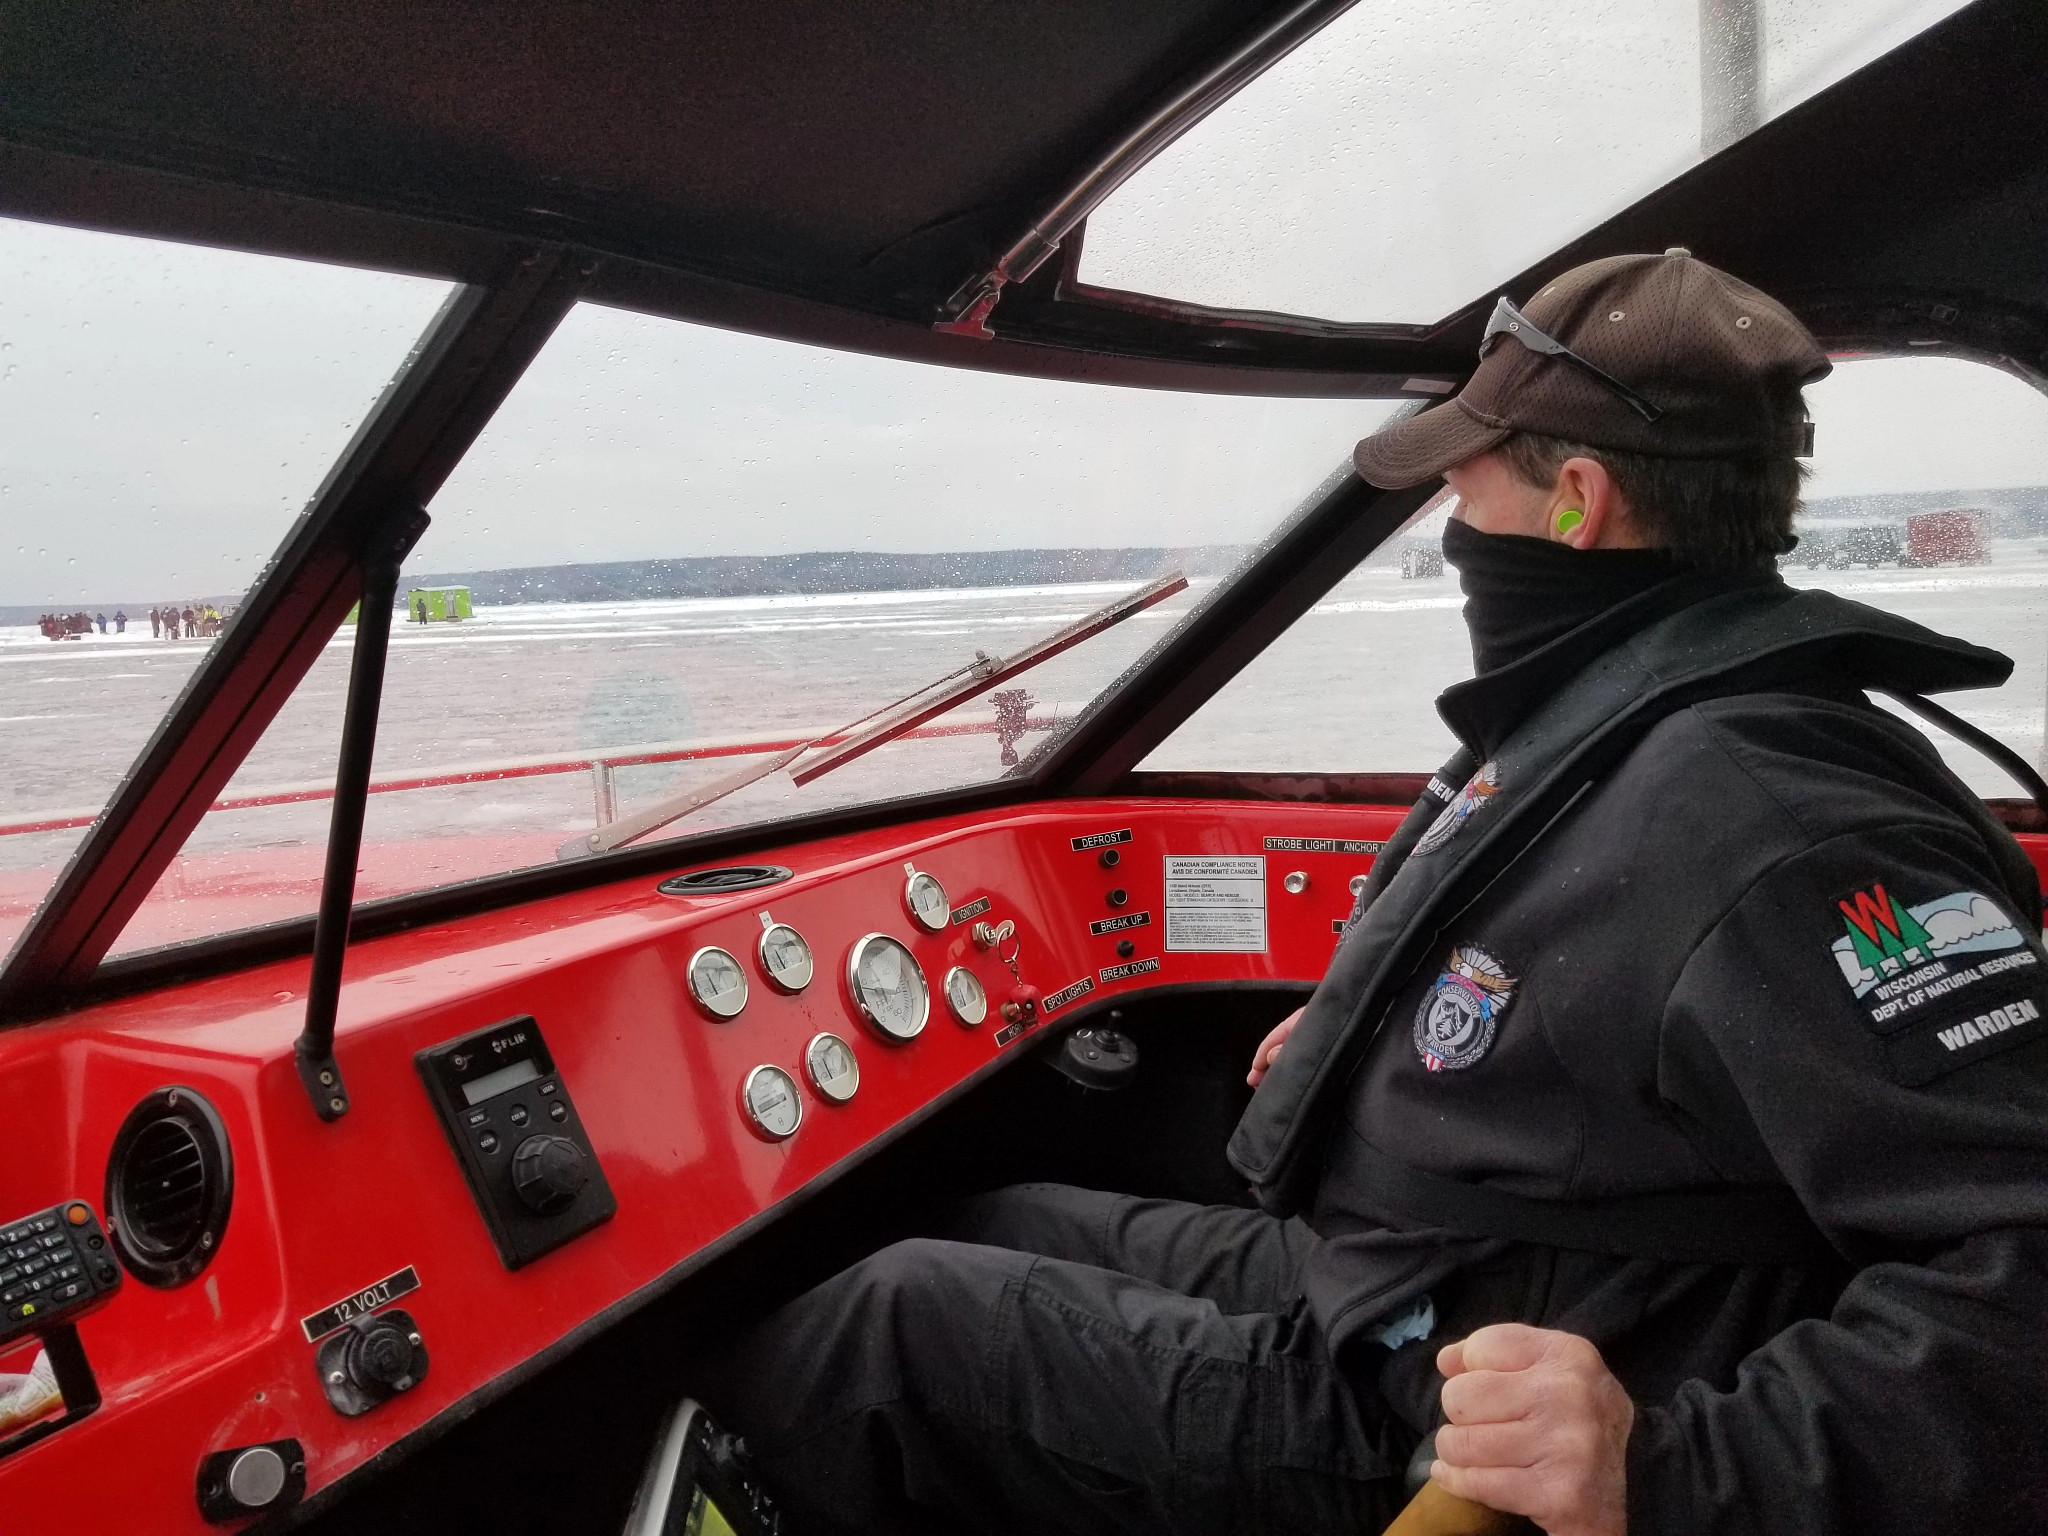  Marine Warden operates DNR airboat on rescue during winter.